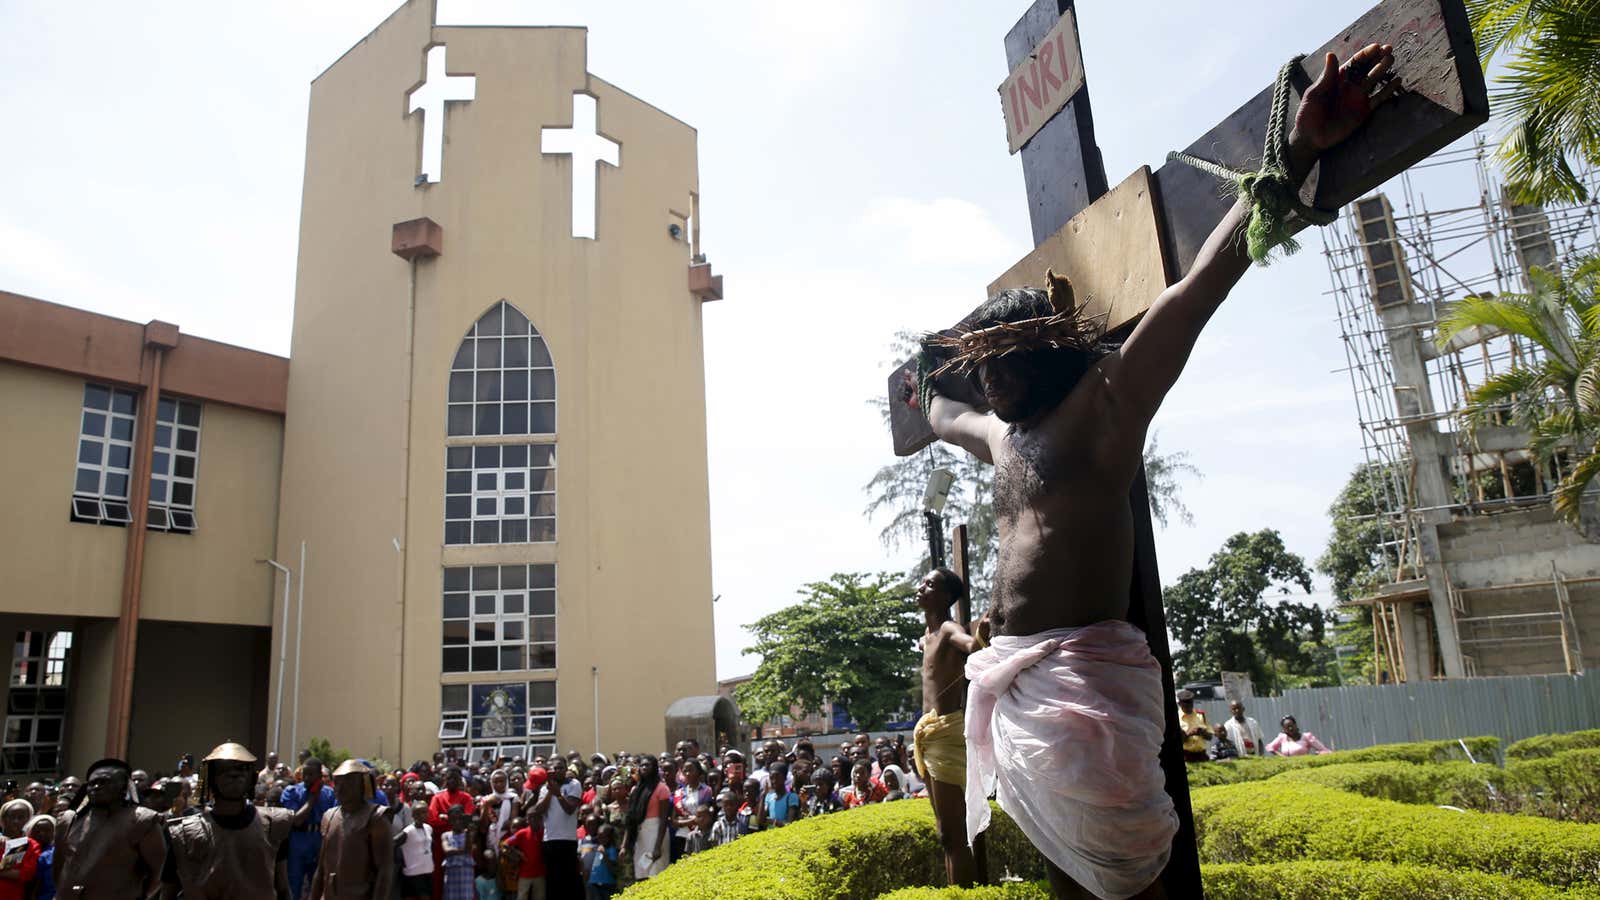 A man, portraying Jesus Christ, takes part in a re-enactment of the crucifixion of Jesus Christ on Good Friday along a road near St. Leo’s…